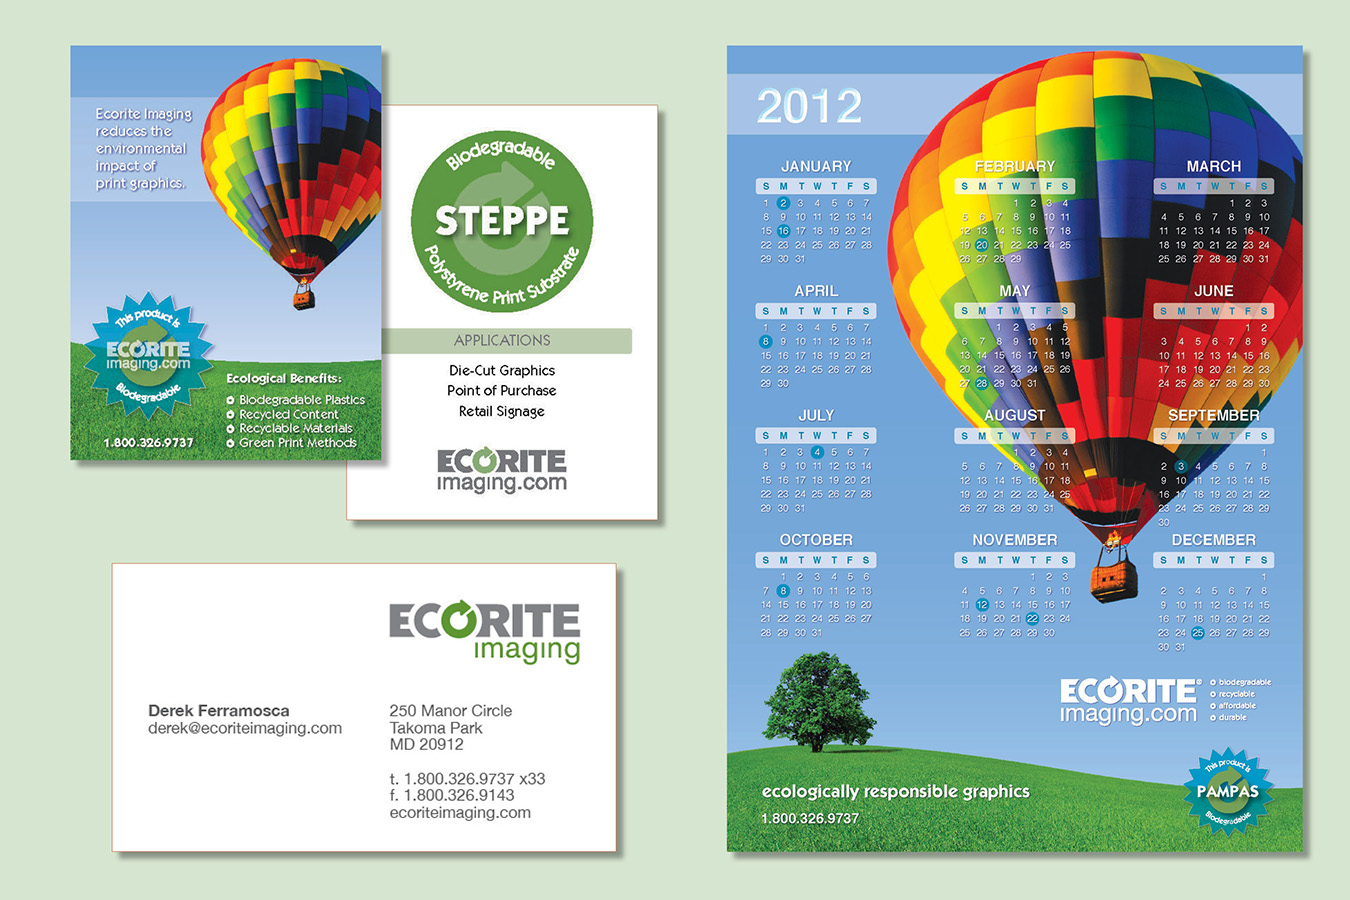 ecorite 11 : Biodegradable materials used in printing marketing pieces and product samples